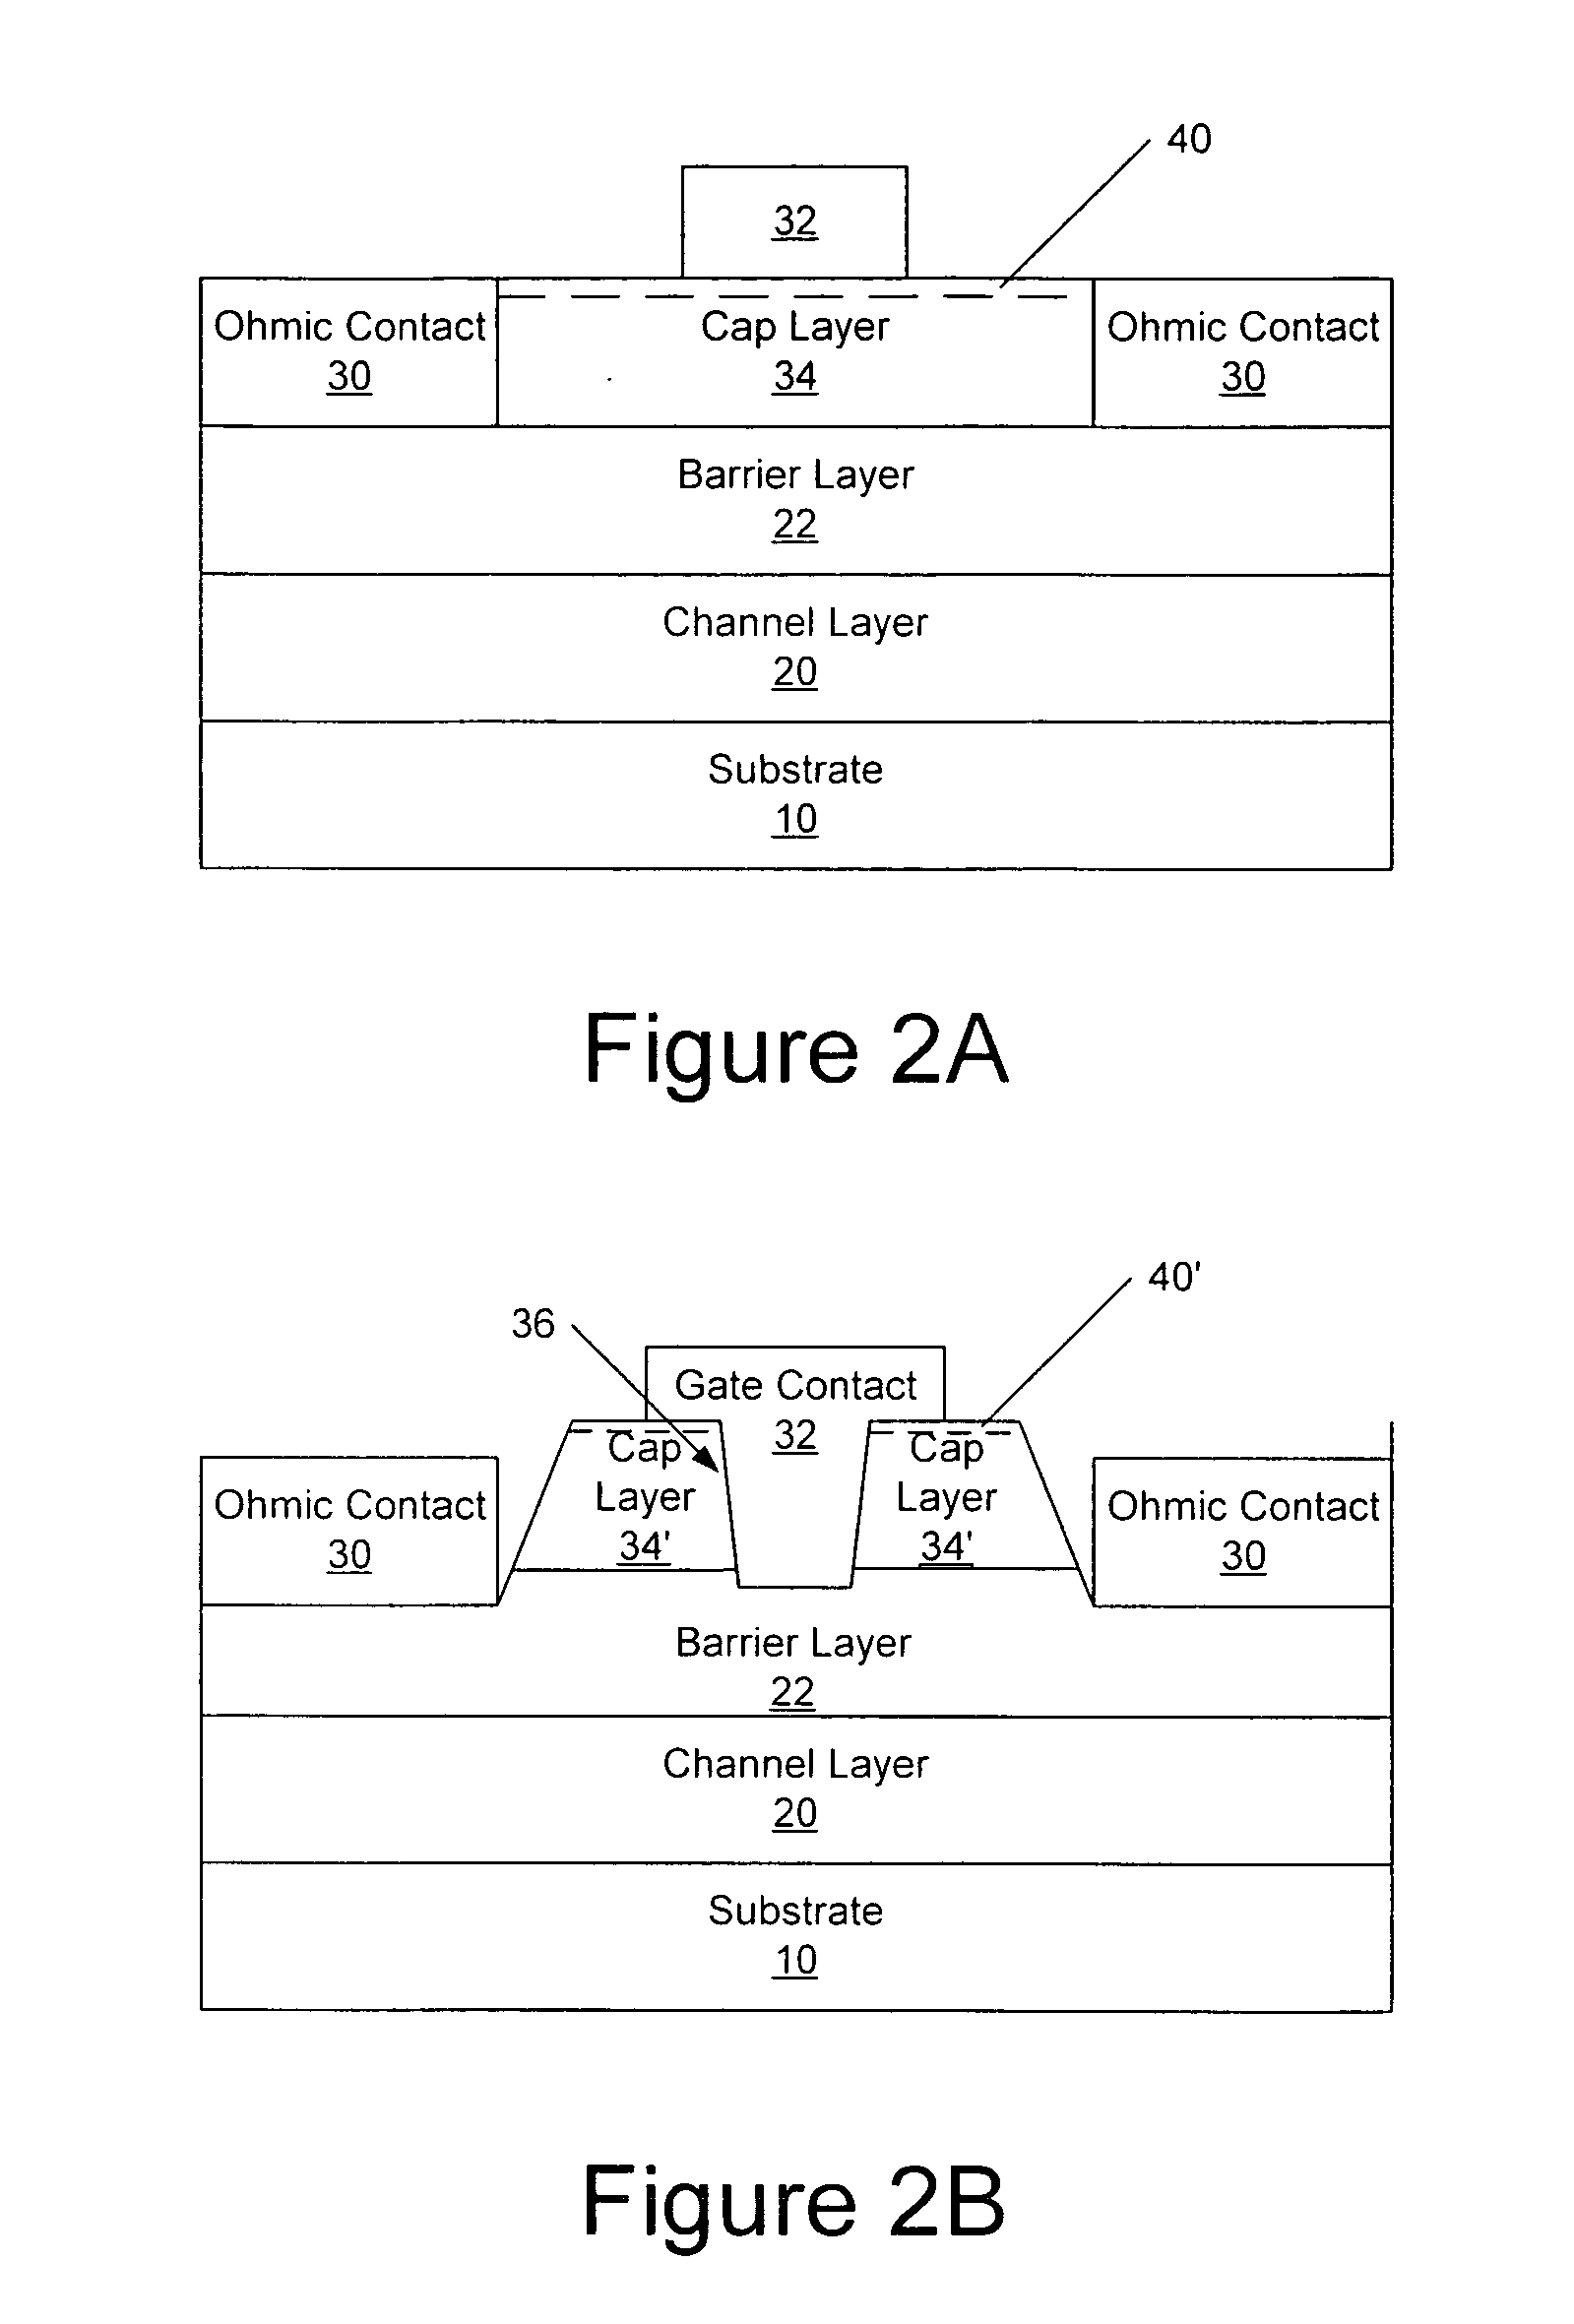 Cap layers and/or passivation layers for nitride-based transistors, transistor structures and methods of fabricating same